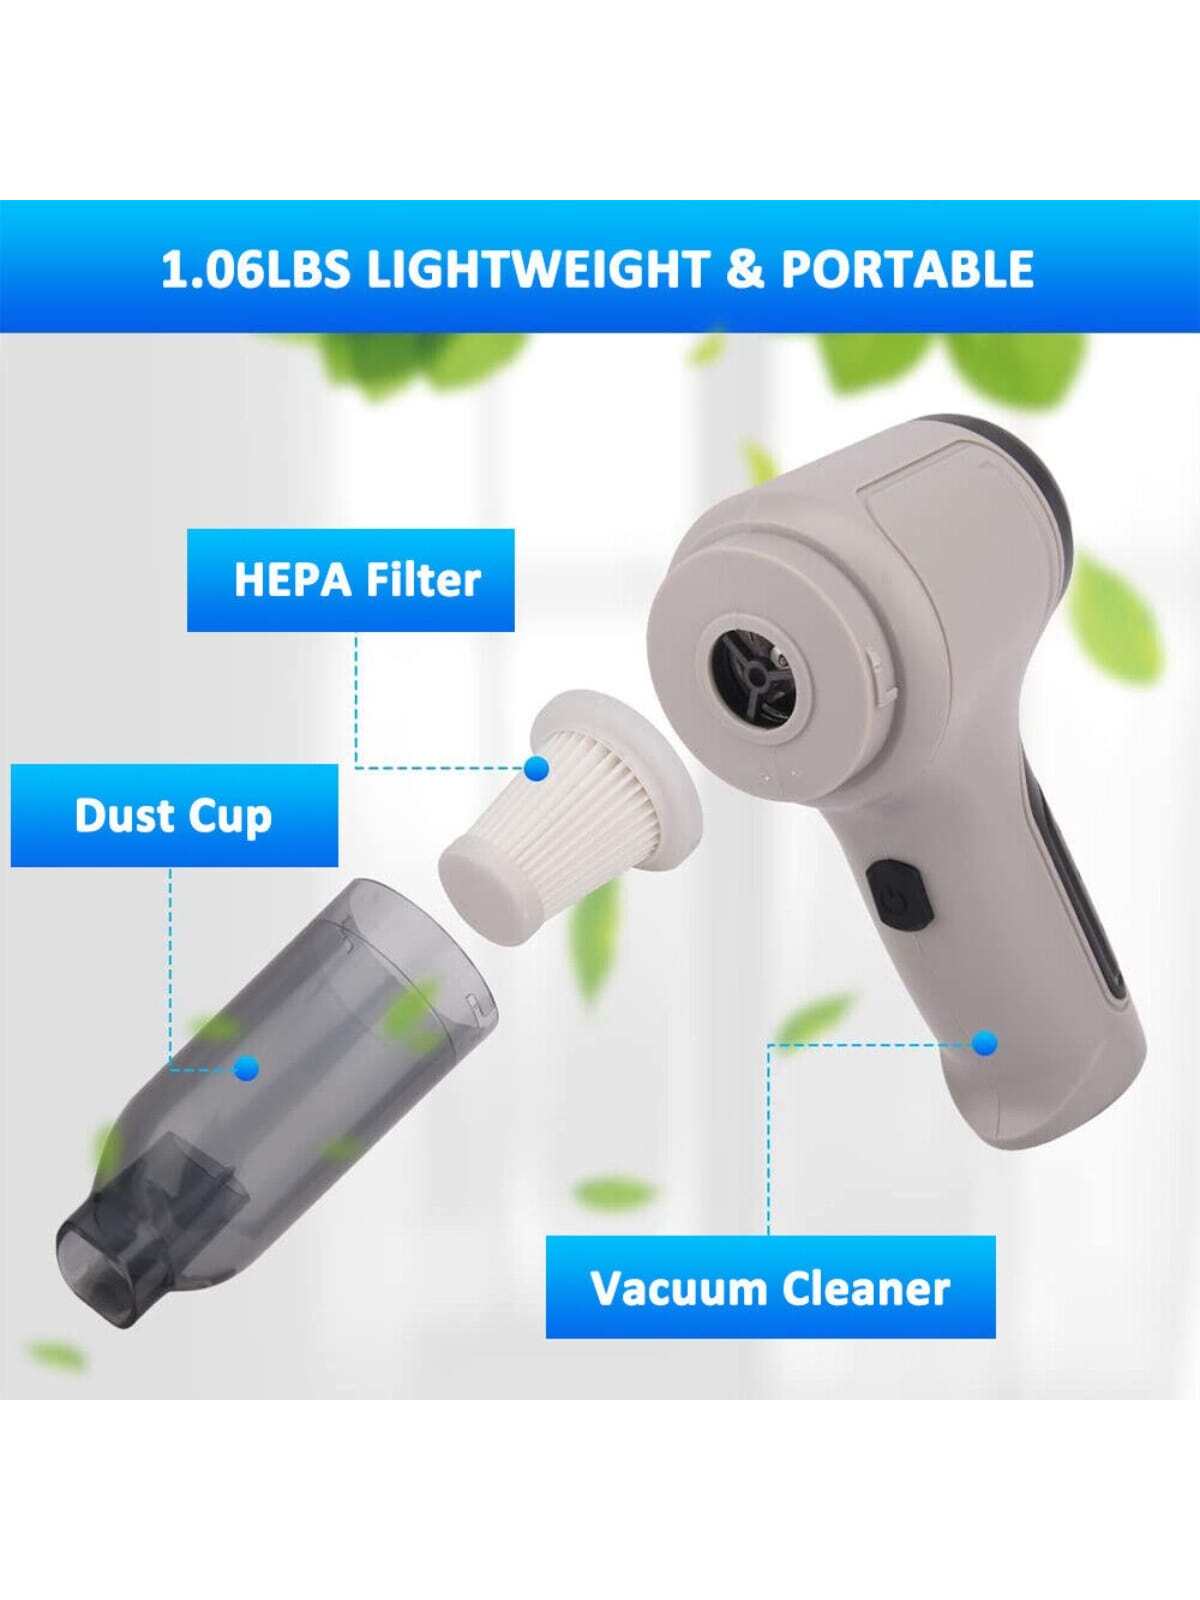 120W 9000PA Cordless Handheld Vacuum Cleaner Blower Car Auto Home Wet Dry Duster